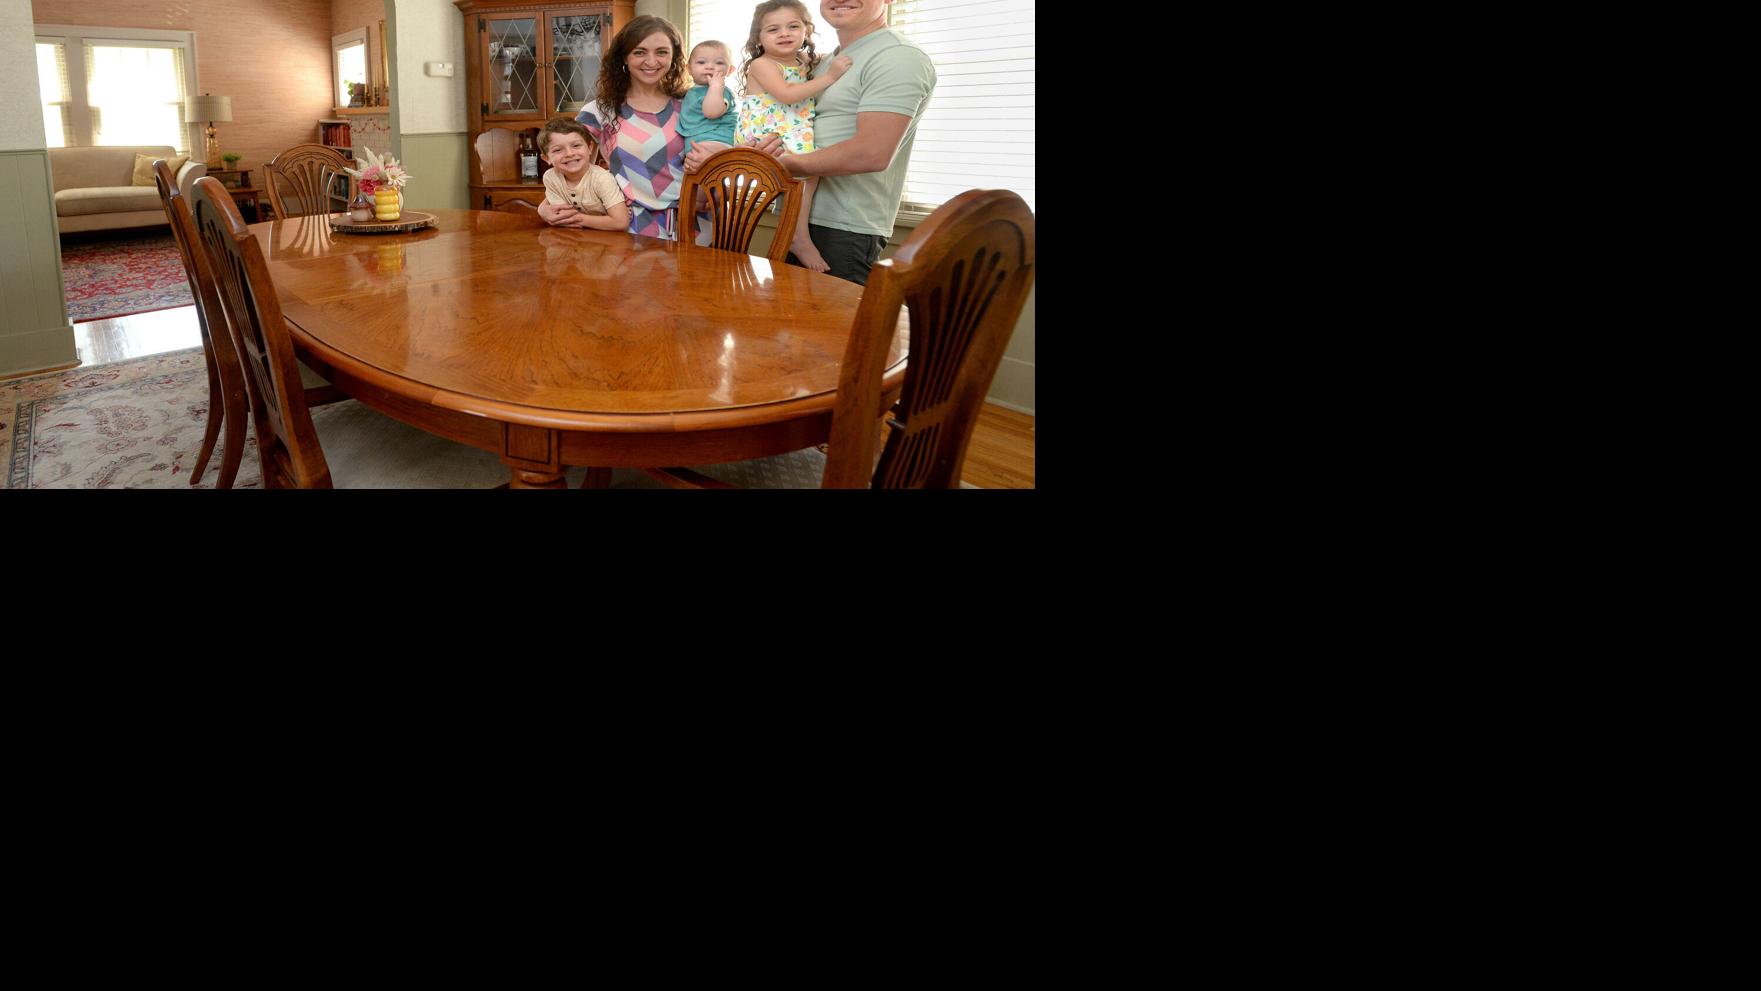 Lincoln family gives a new life to an old table — and much more